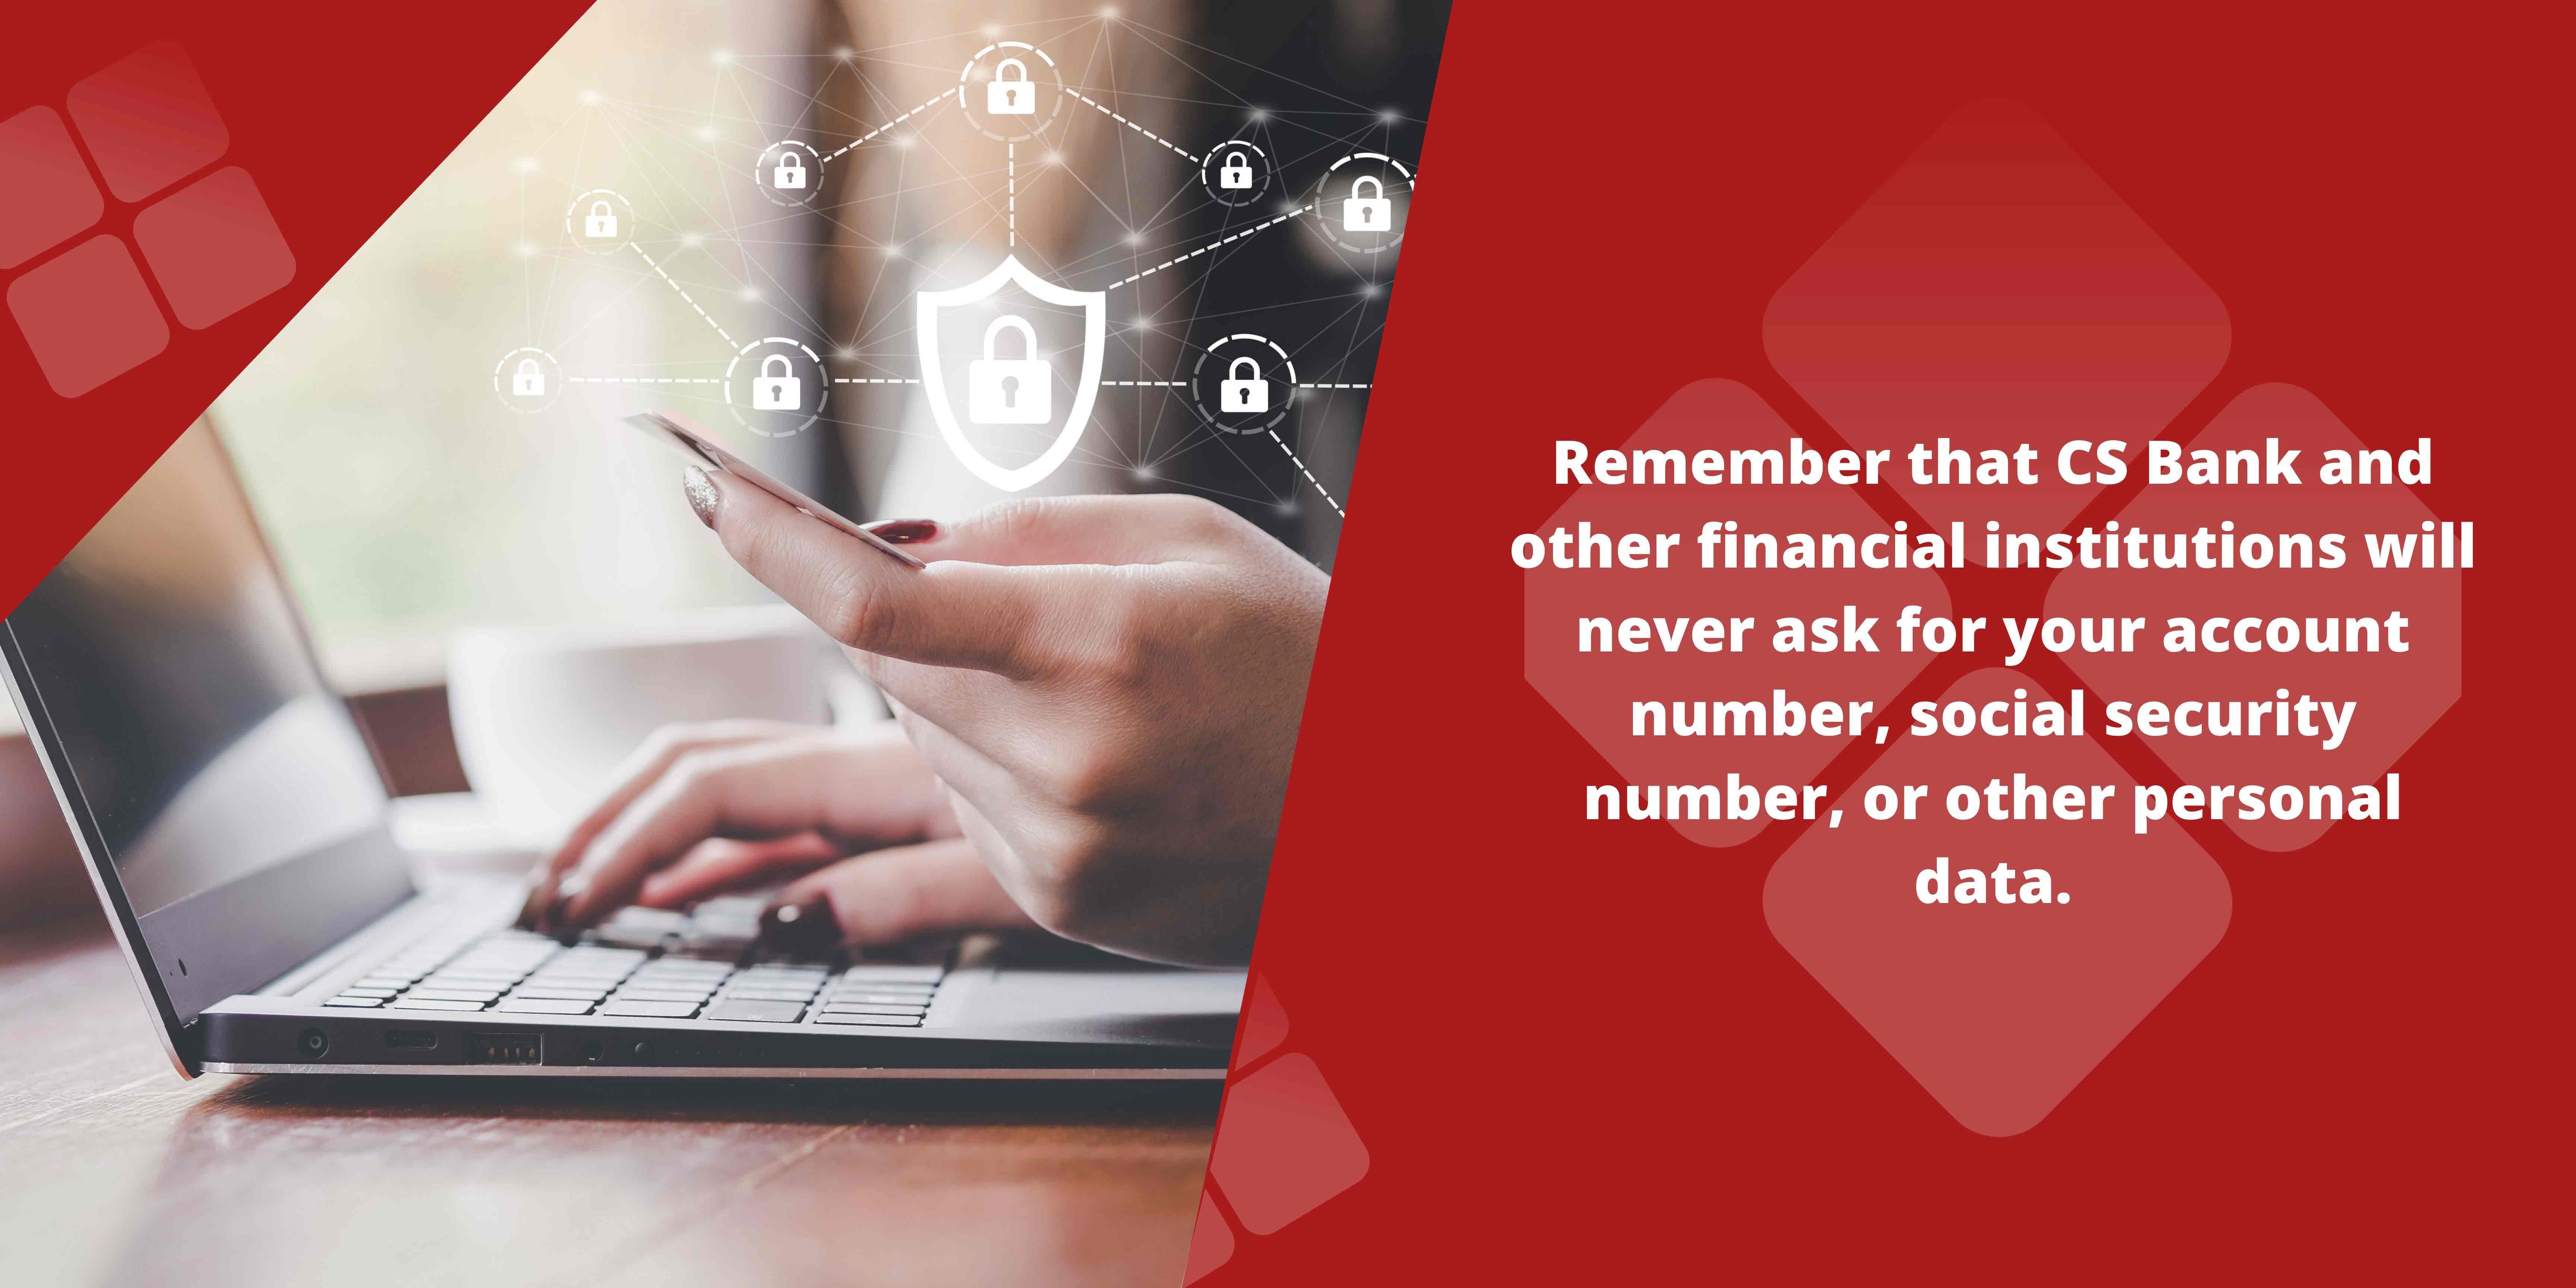 Remember that CS Bank and other financial institutions will never ask for your account number, social security number or other personal data. 